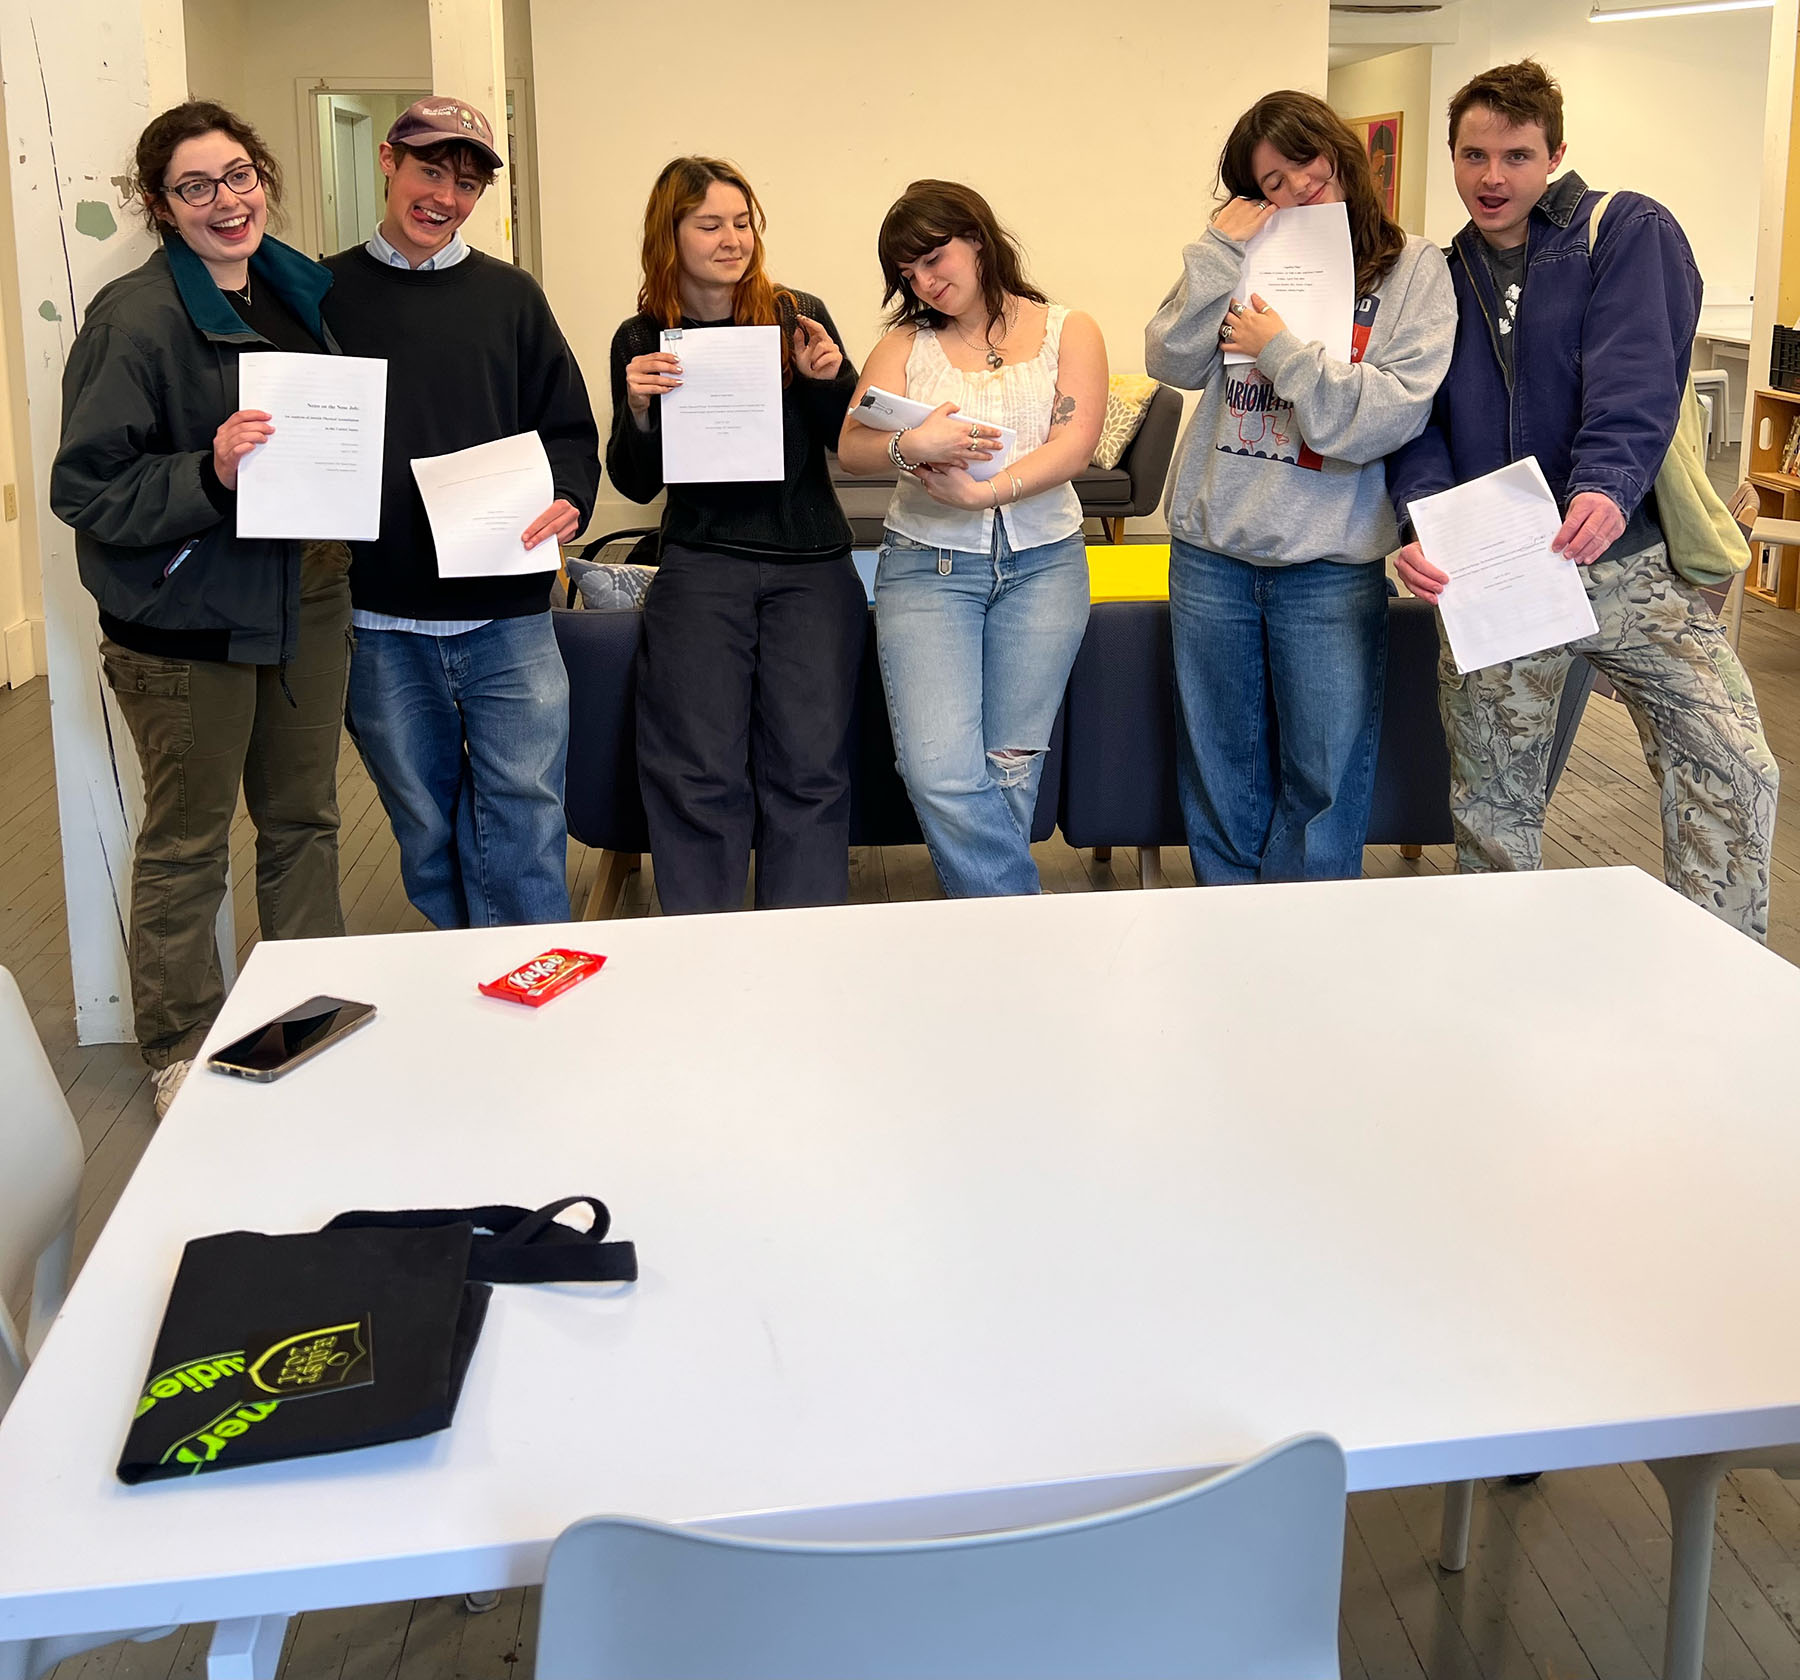 Six students holding pieces of paper standing in front of a table.